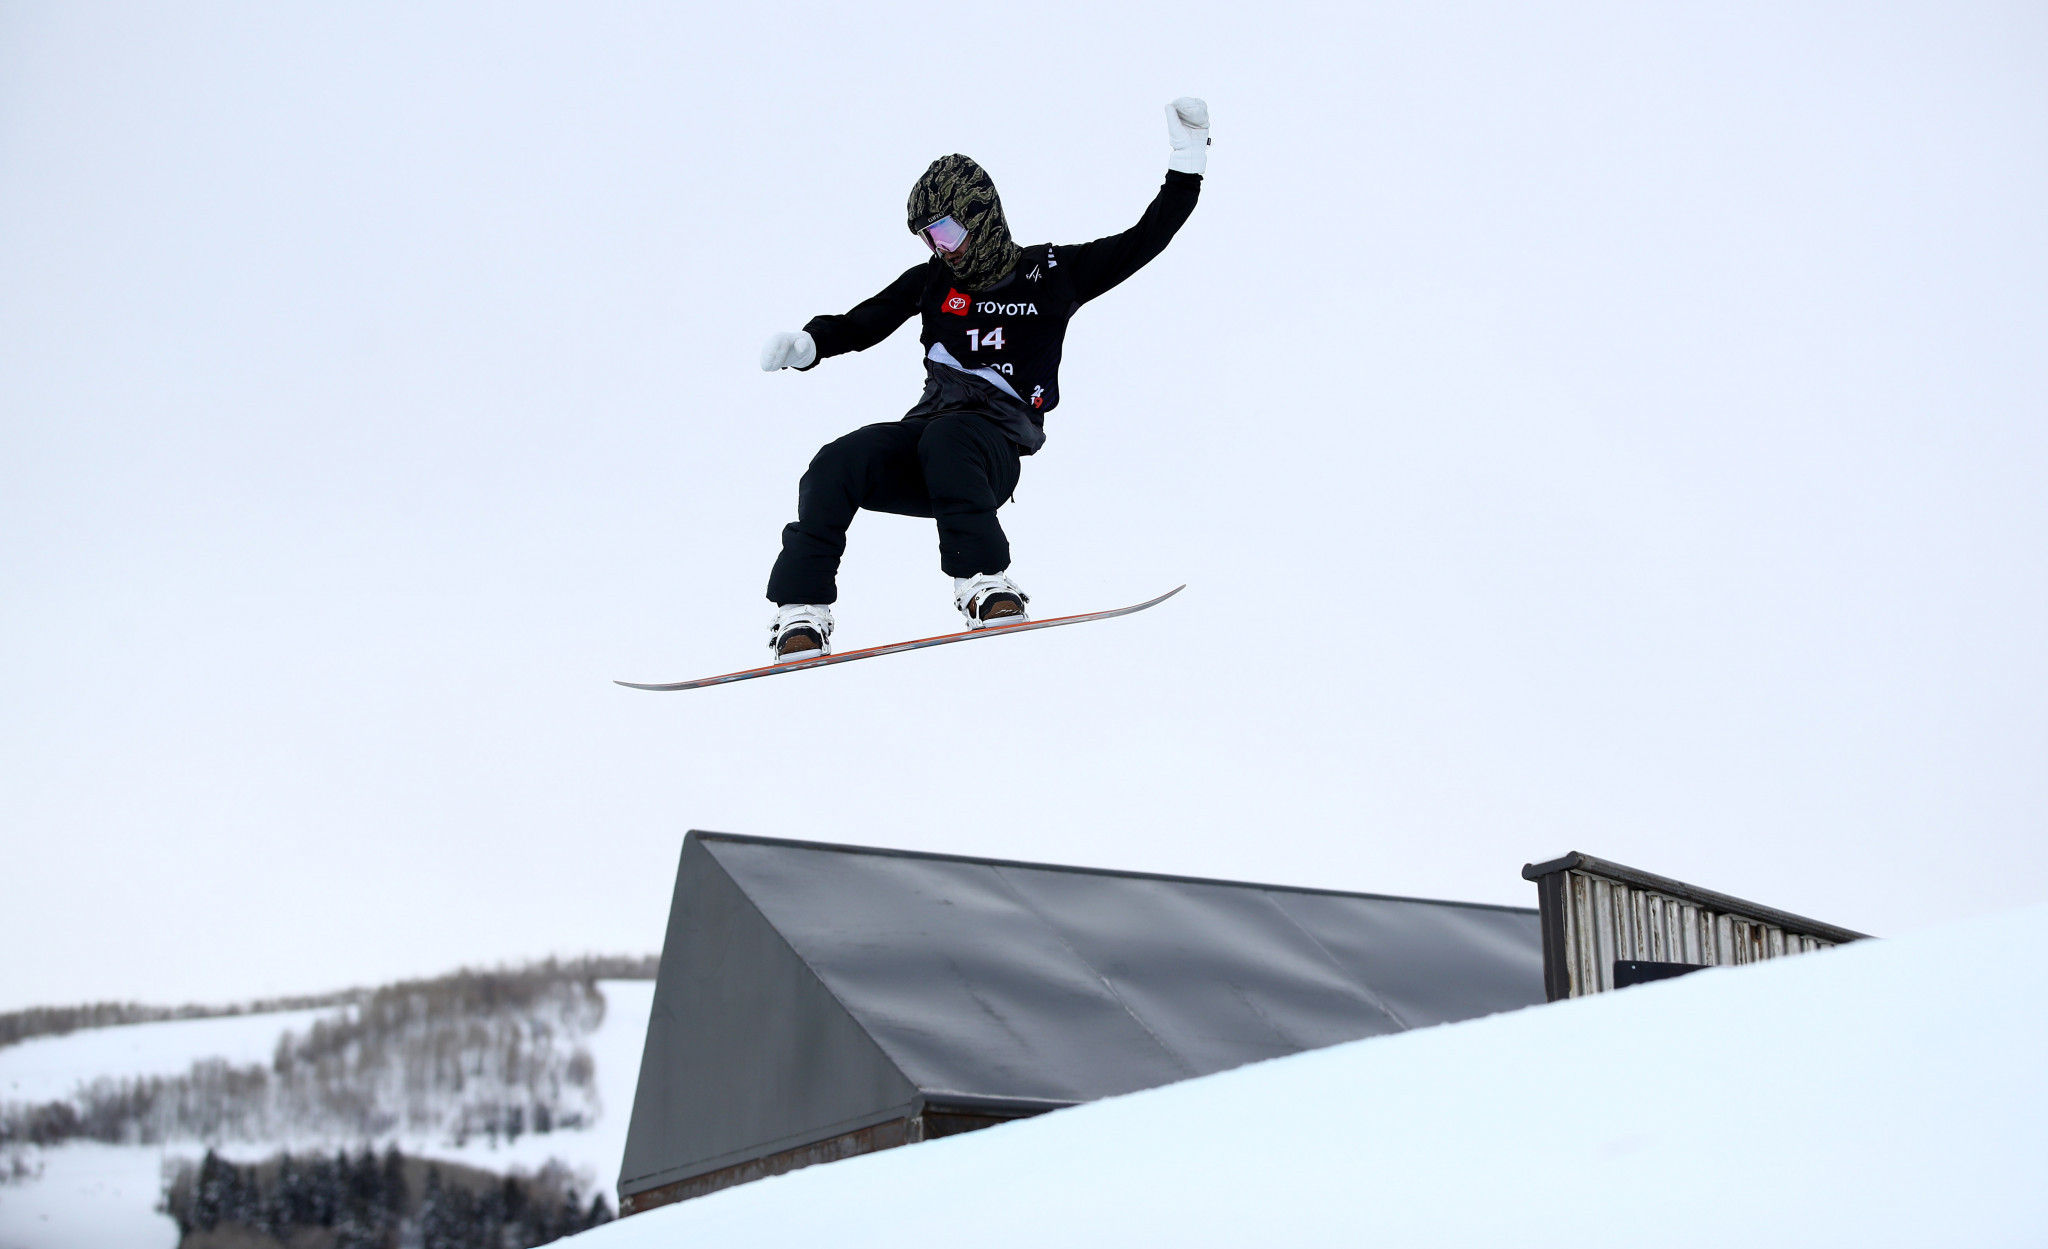 Niklas Mattsson had a day to remember as he won his first slopestyle World Cup in Laax ©Getty Images